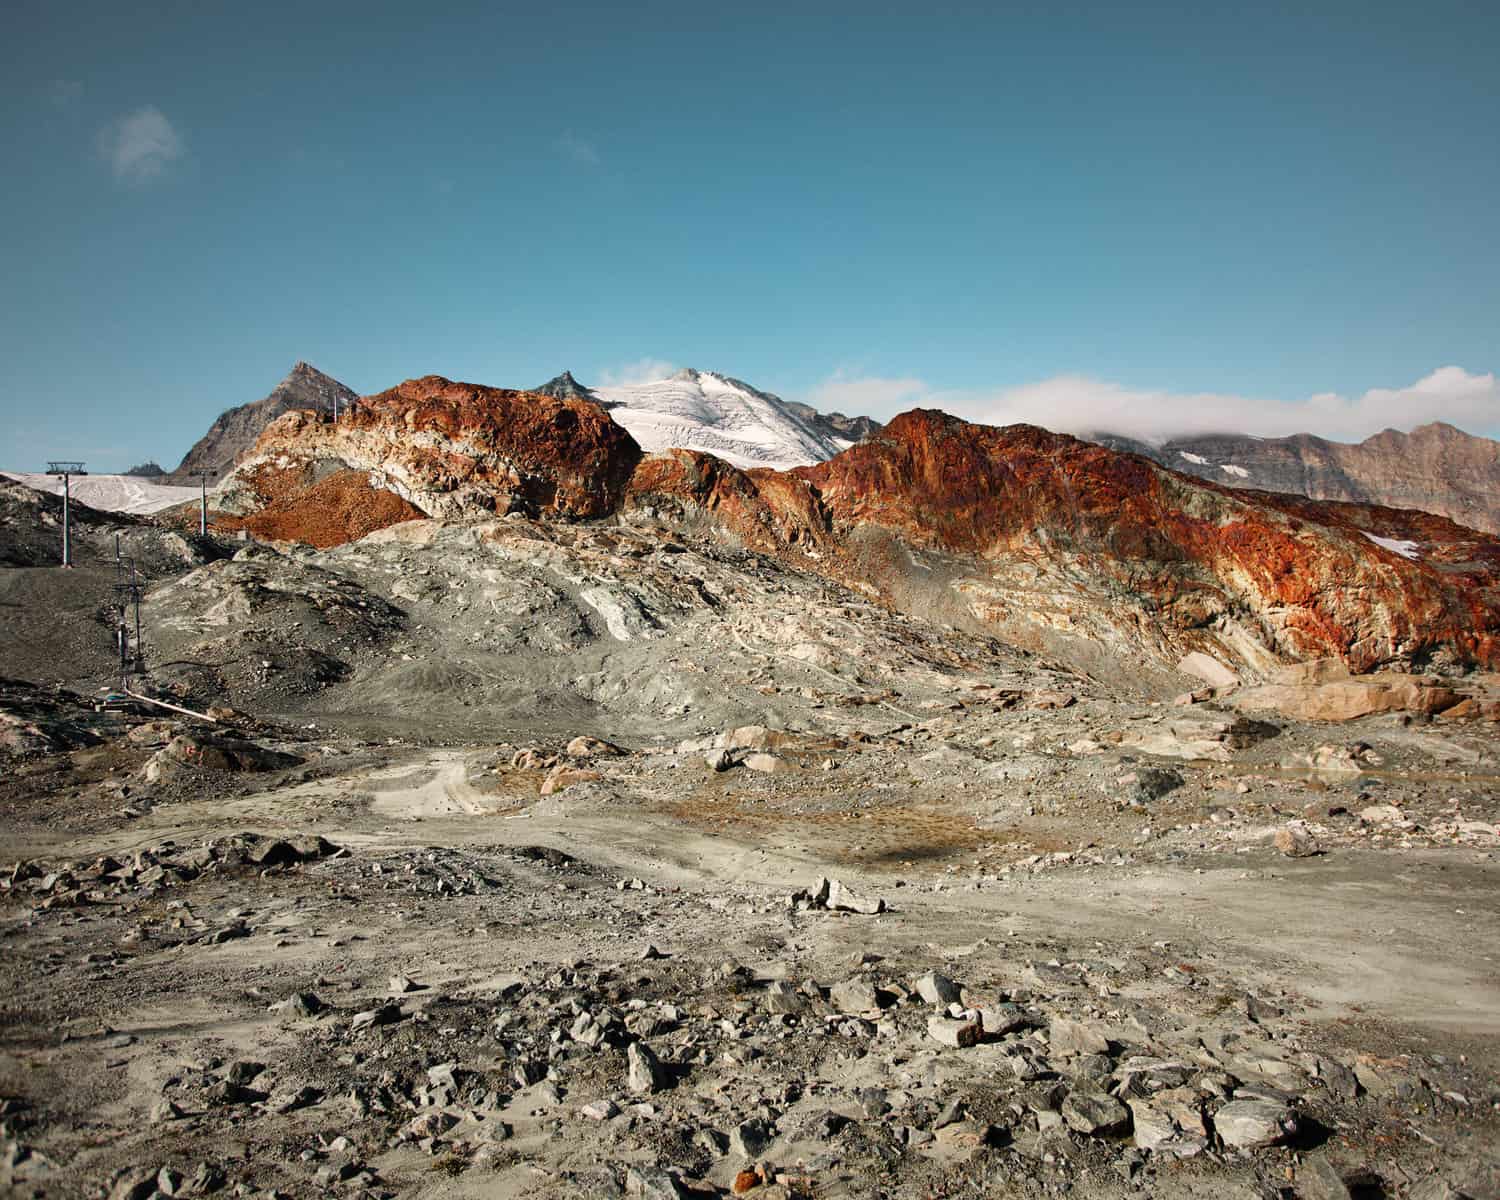 Image Description: A landscape format image. A grey-yellow almost desert landscape dominates the foreground. There is a clear blue sky above and striking orange rock in the hills in the background. The image looks like it could have been made somewhere very hot, except for the fact that there is a glacier, snow-capped mountains and ski lift hardware visible in the far background.